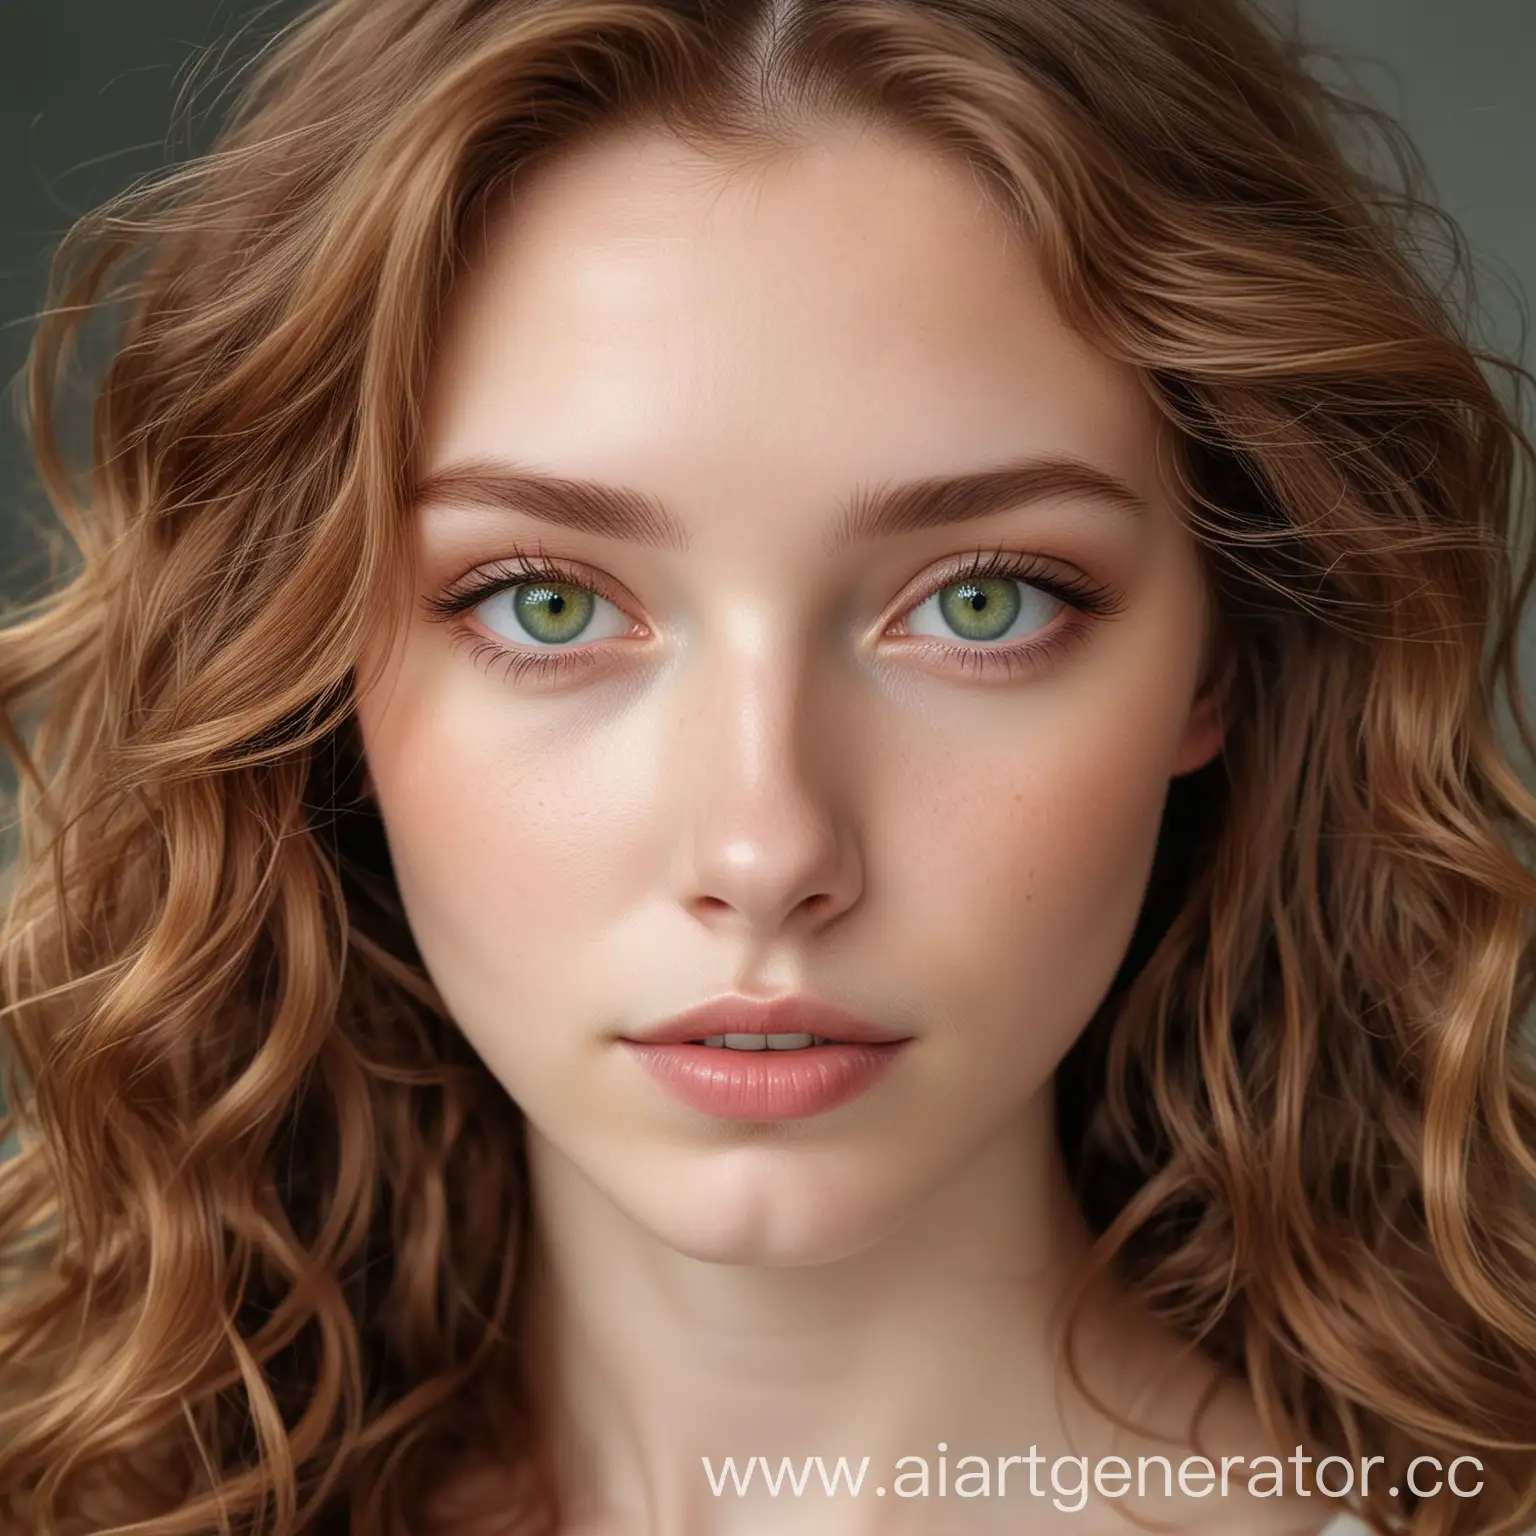 Portrait-of-a-ChestnutHaired-Girl-with-Pale-Skin-and-Green-Eyes